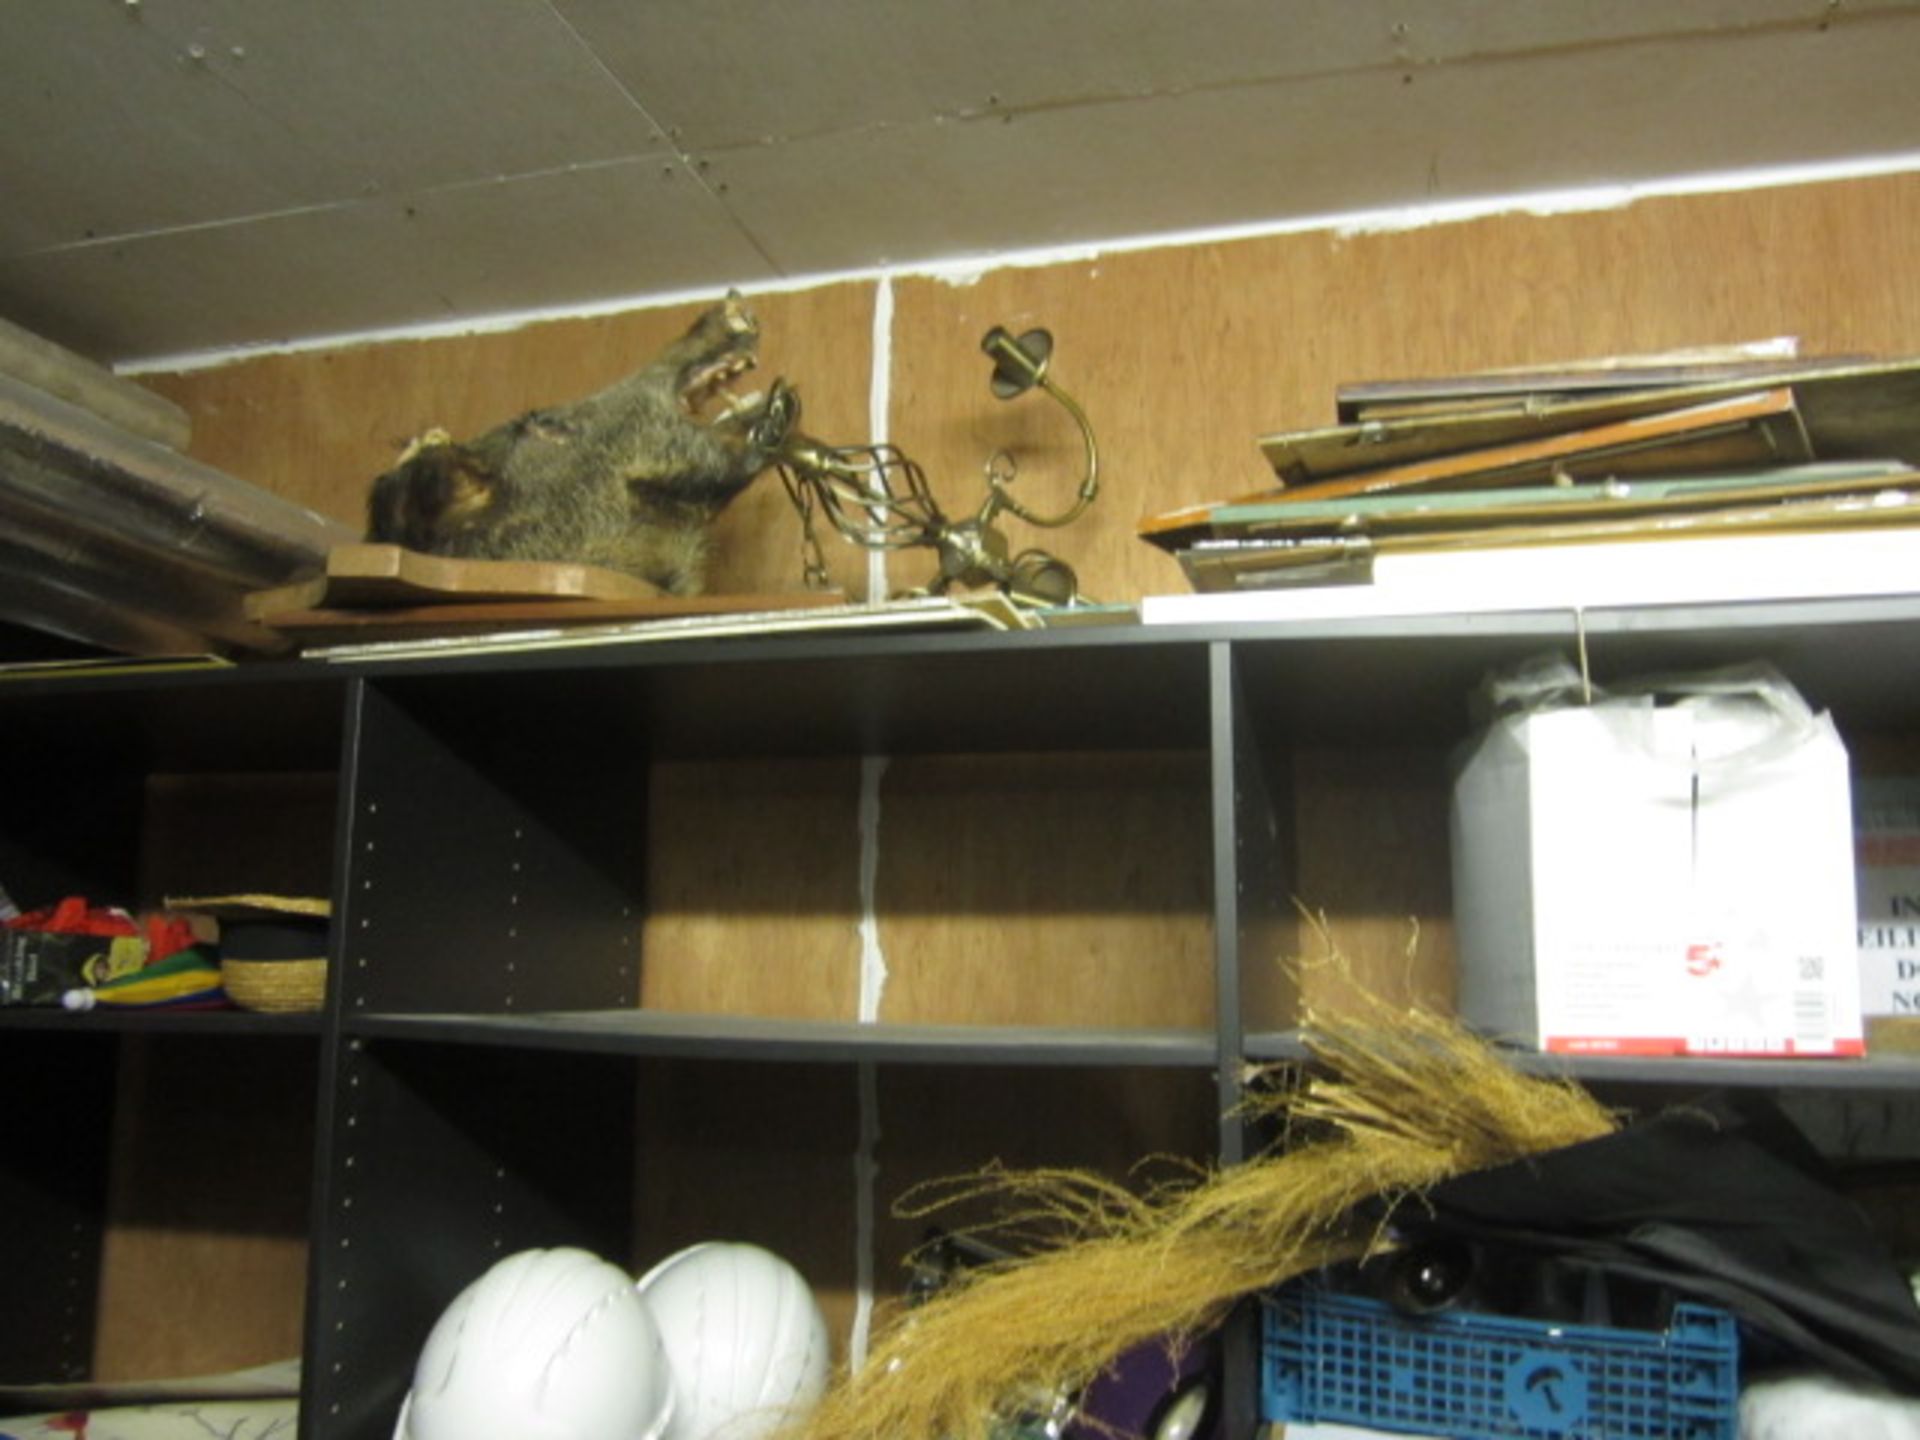 3 x Aluminium framed storage racks and miscellaneous contents of room including wall mounted boars - Image 7 of 9